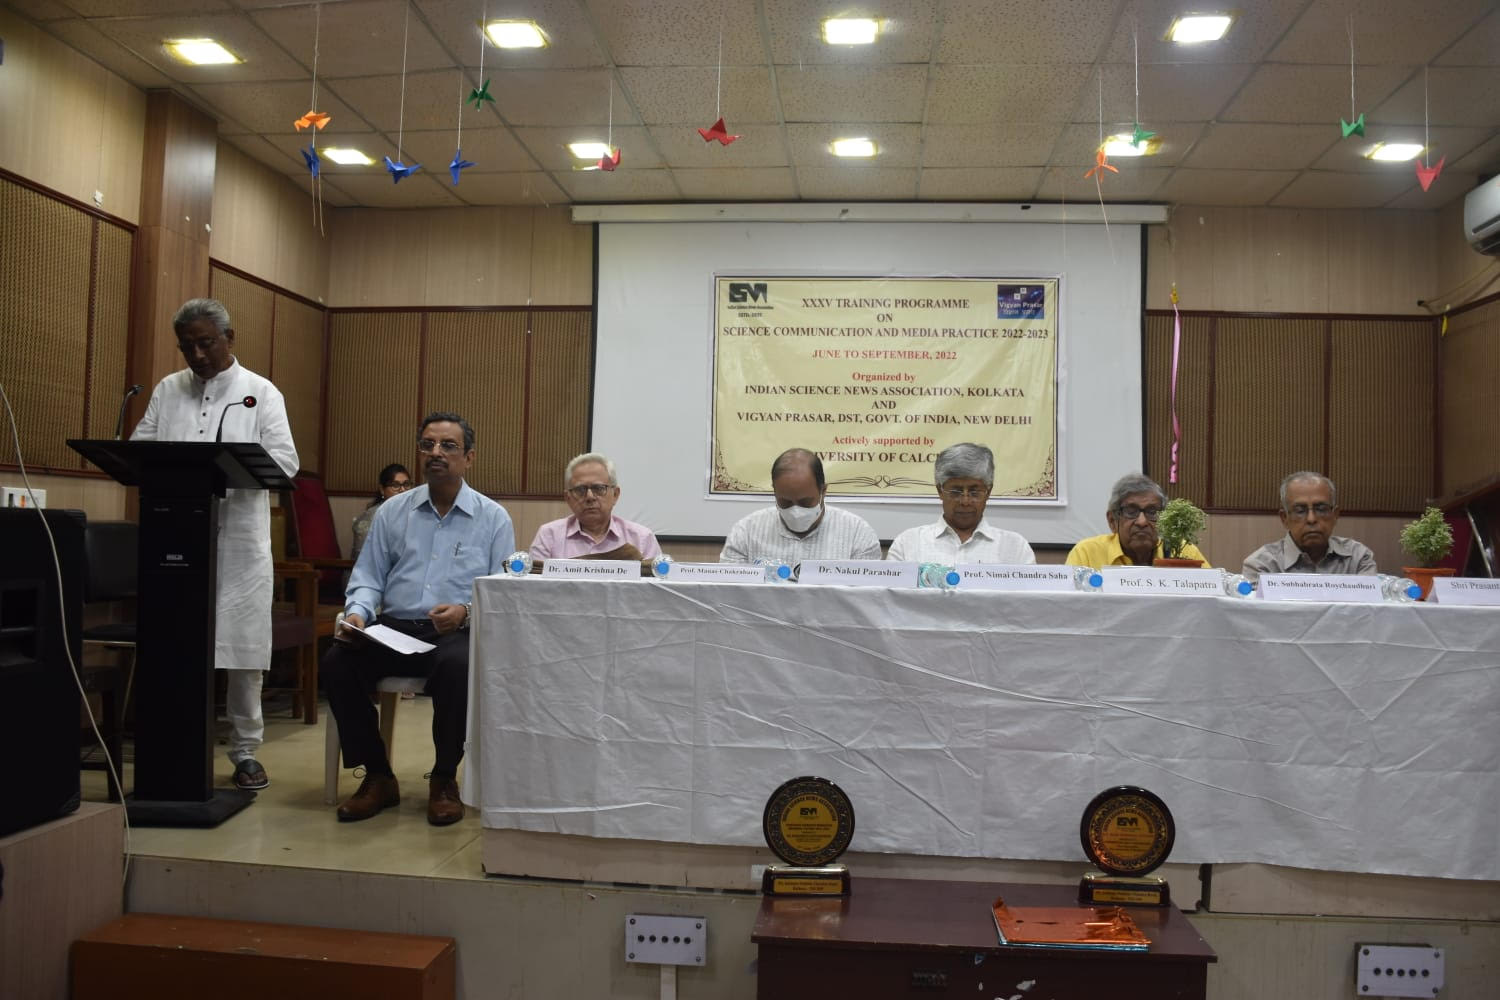 Inauguration of XXXV Training Programme on Science Communication and Media Practice,Dated: 17th June, 2021